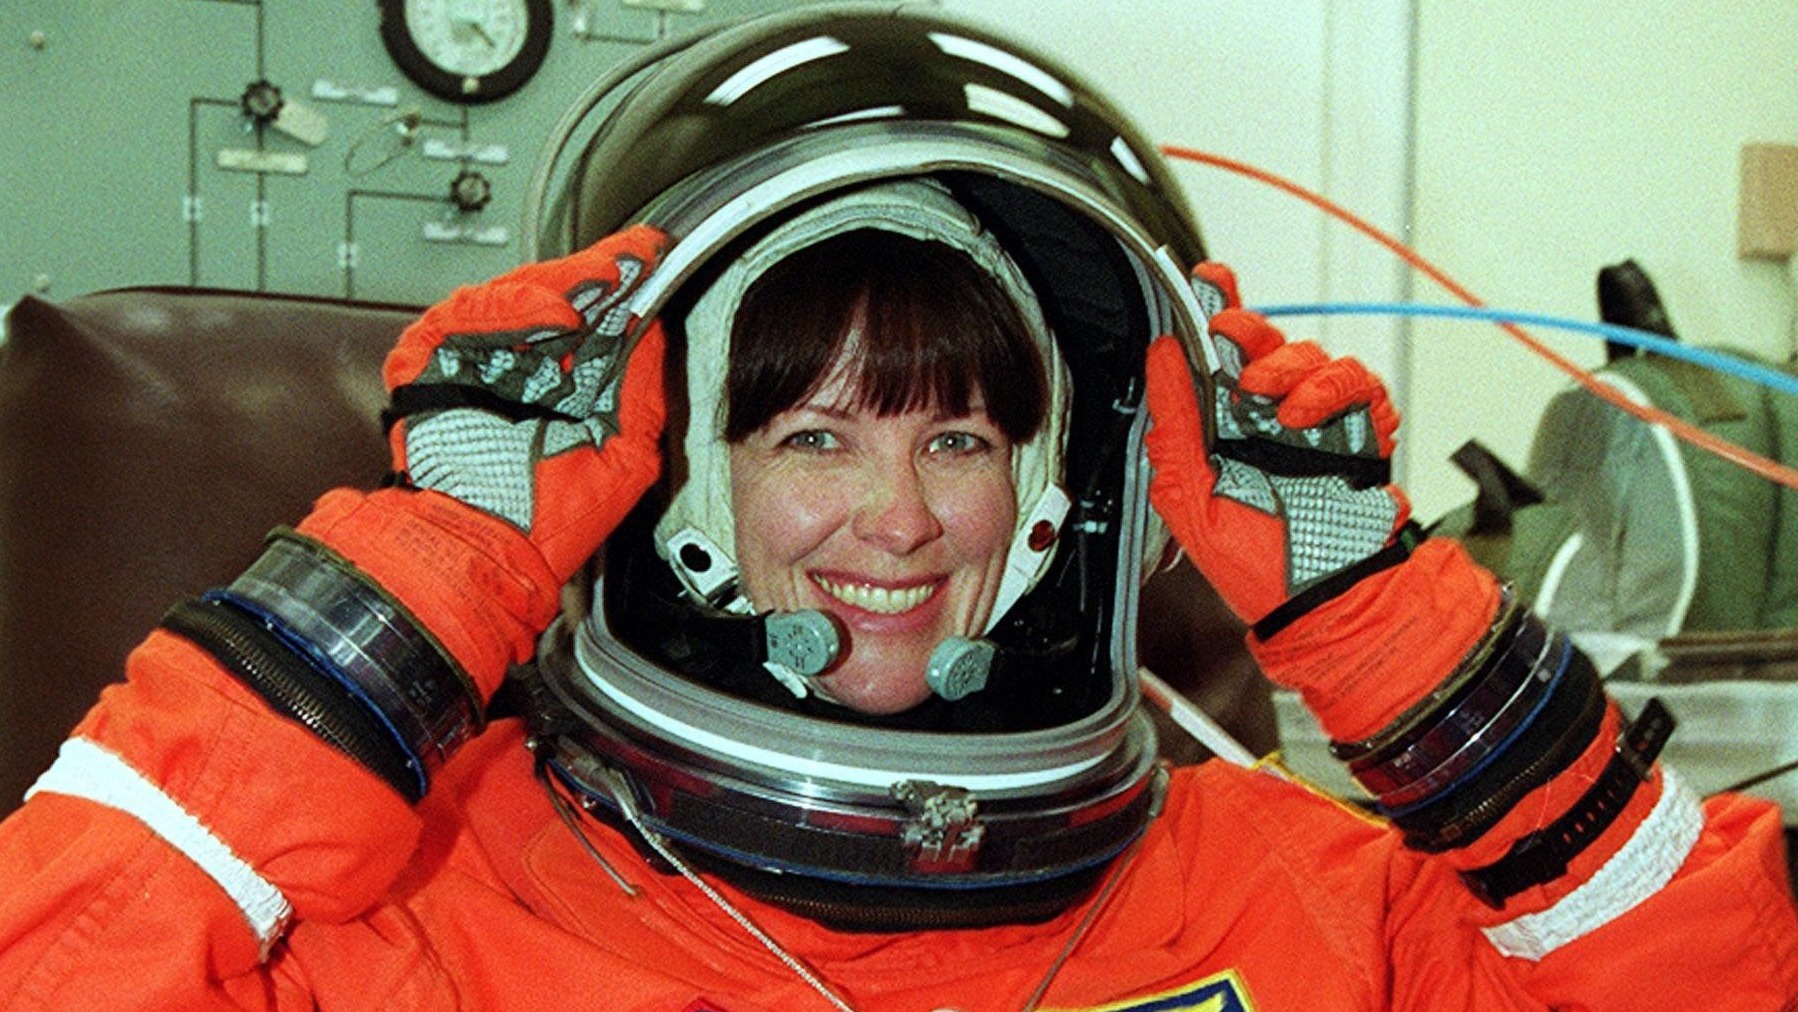 nasa astronaut janet kavandi wearing a helmet with open visor and an orange launching spacesuit. she smiles and grasps the visor of the helmet with both hands. behind her is medical equipment